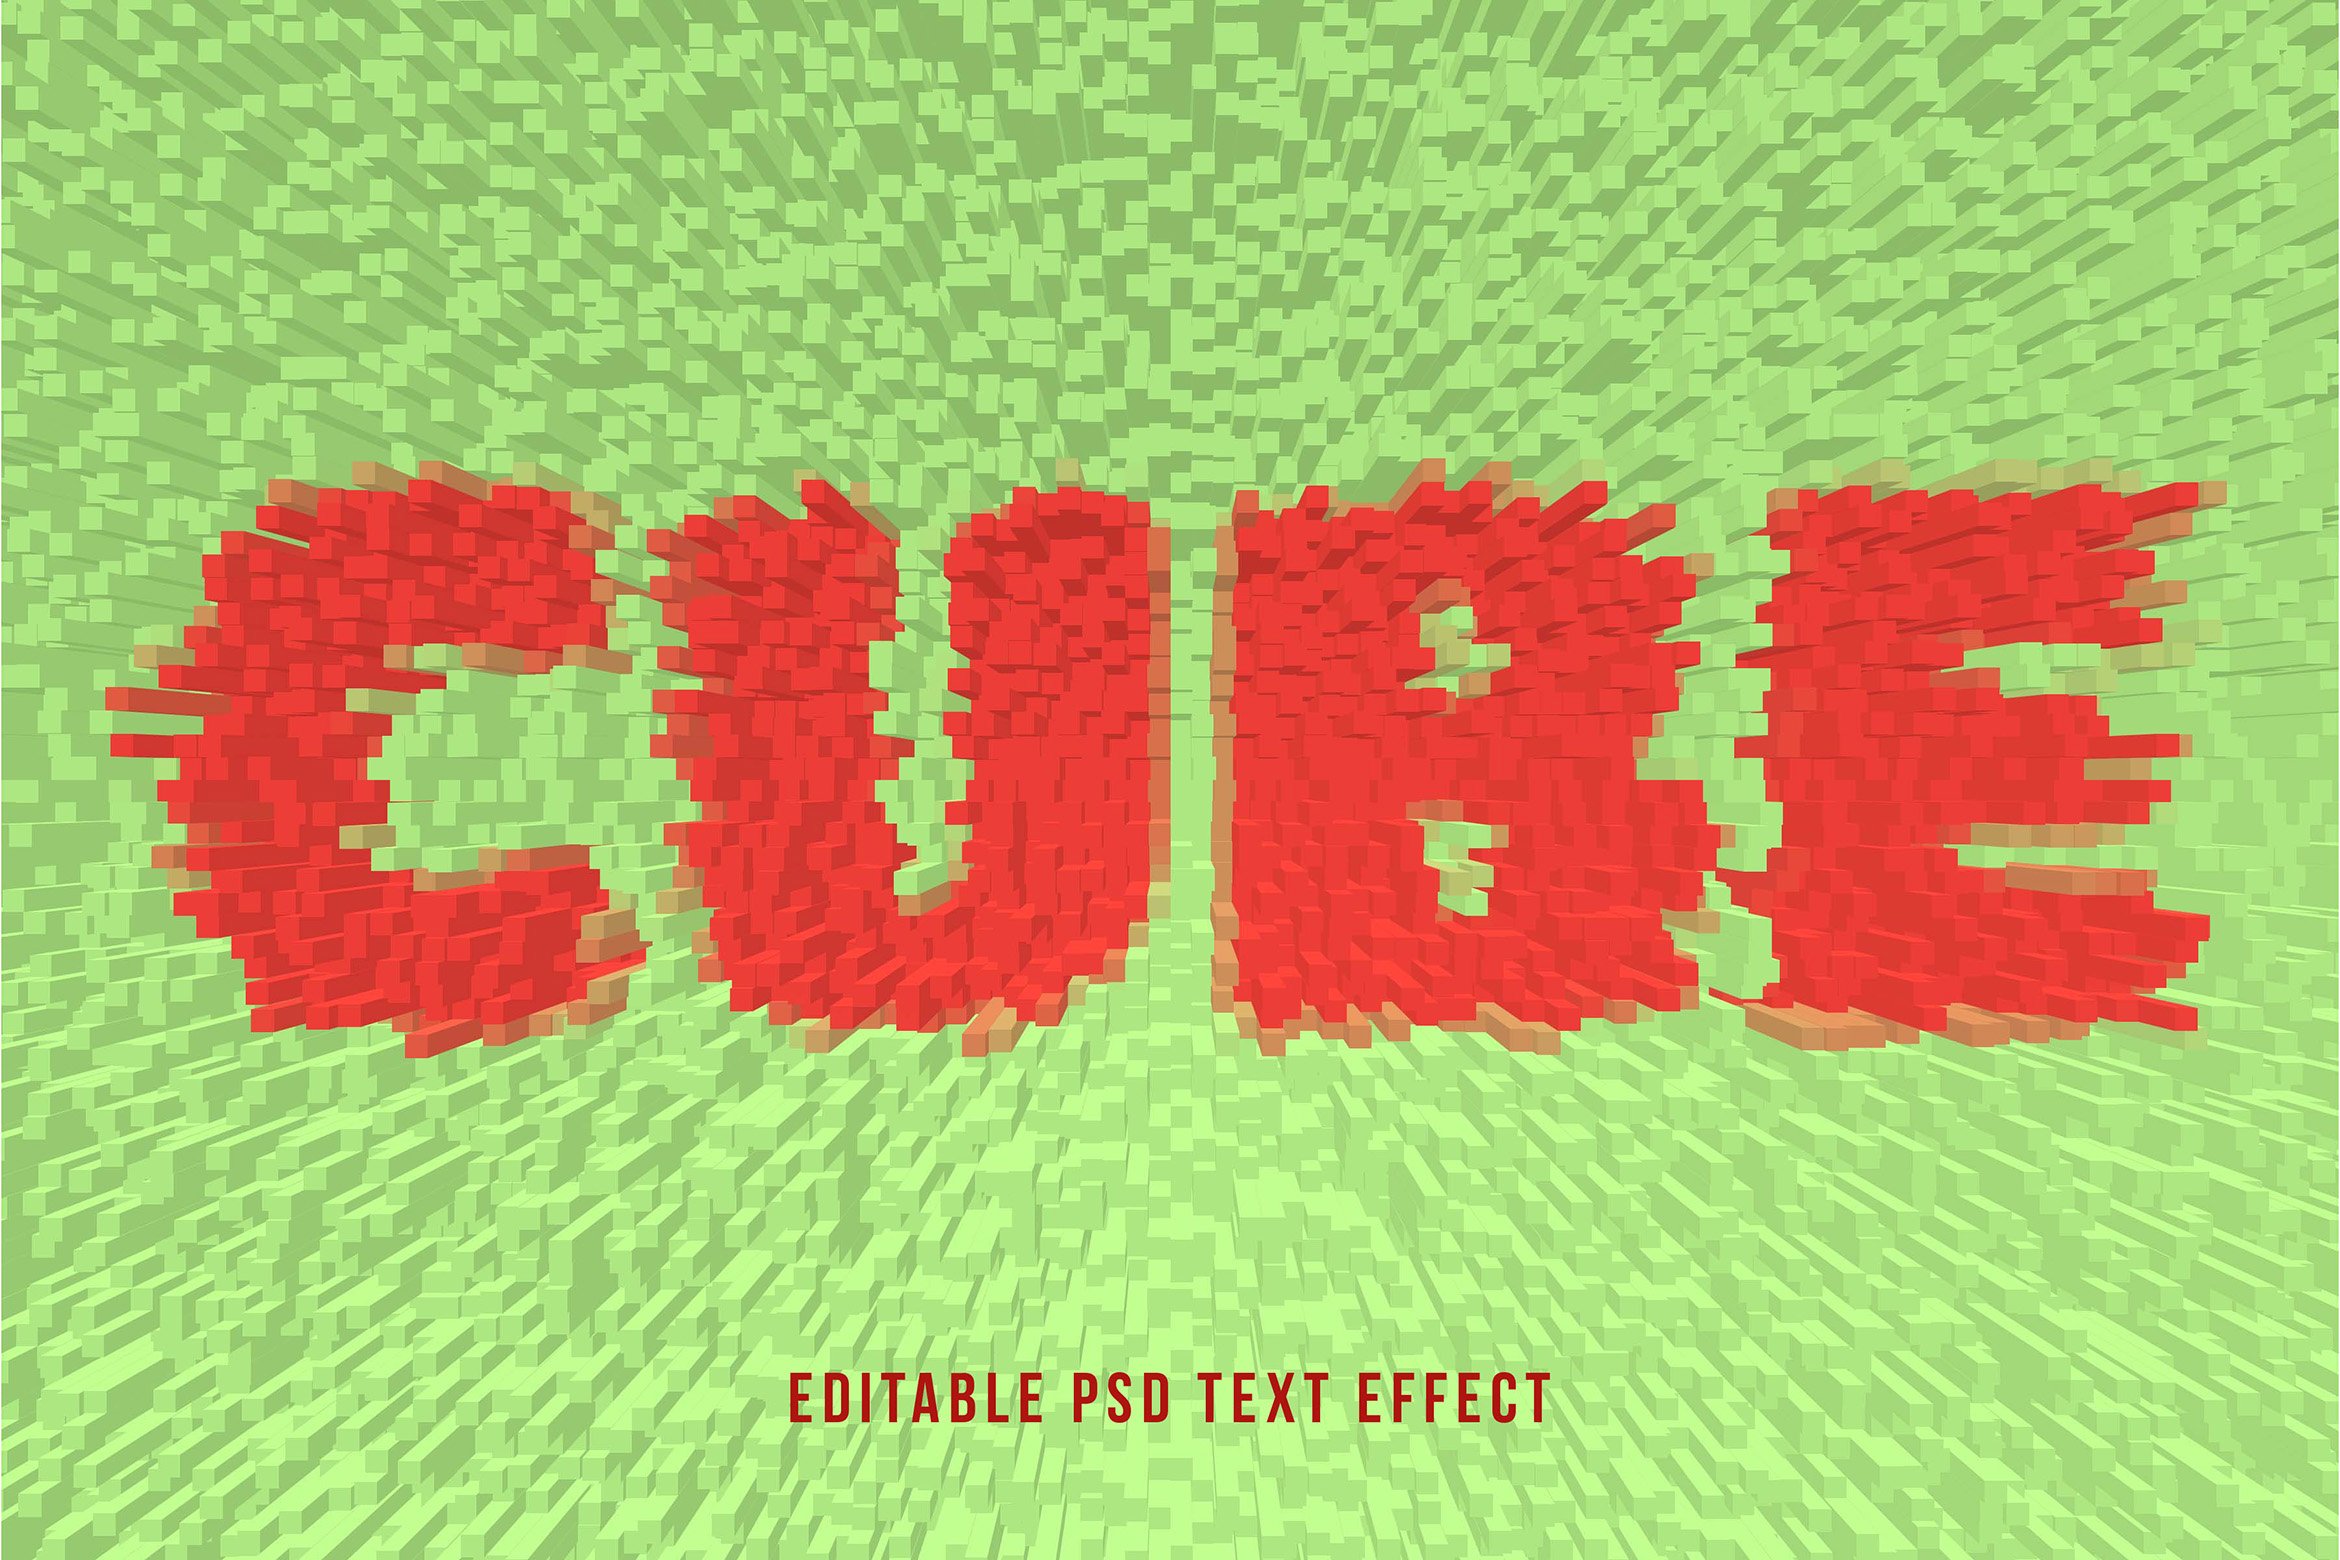 Text Effect Cubecover image.